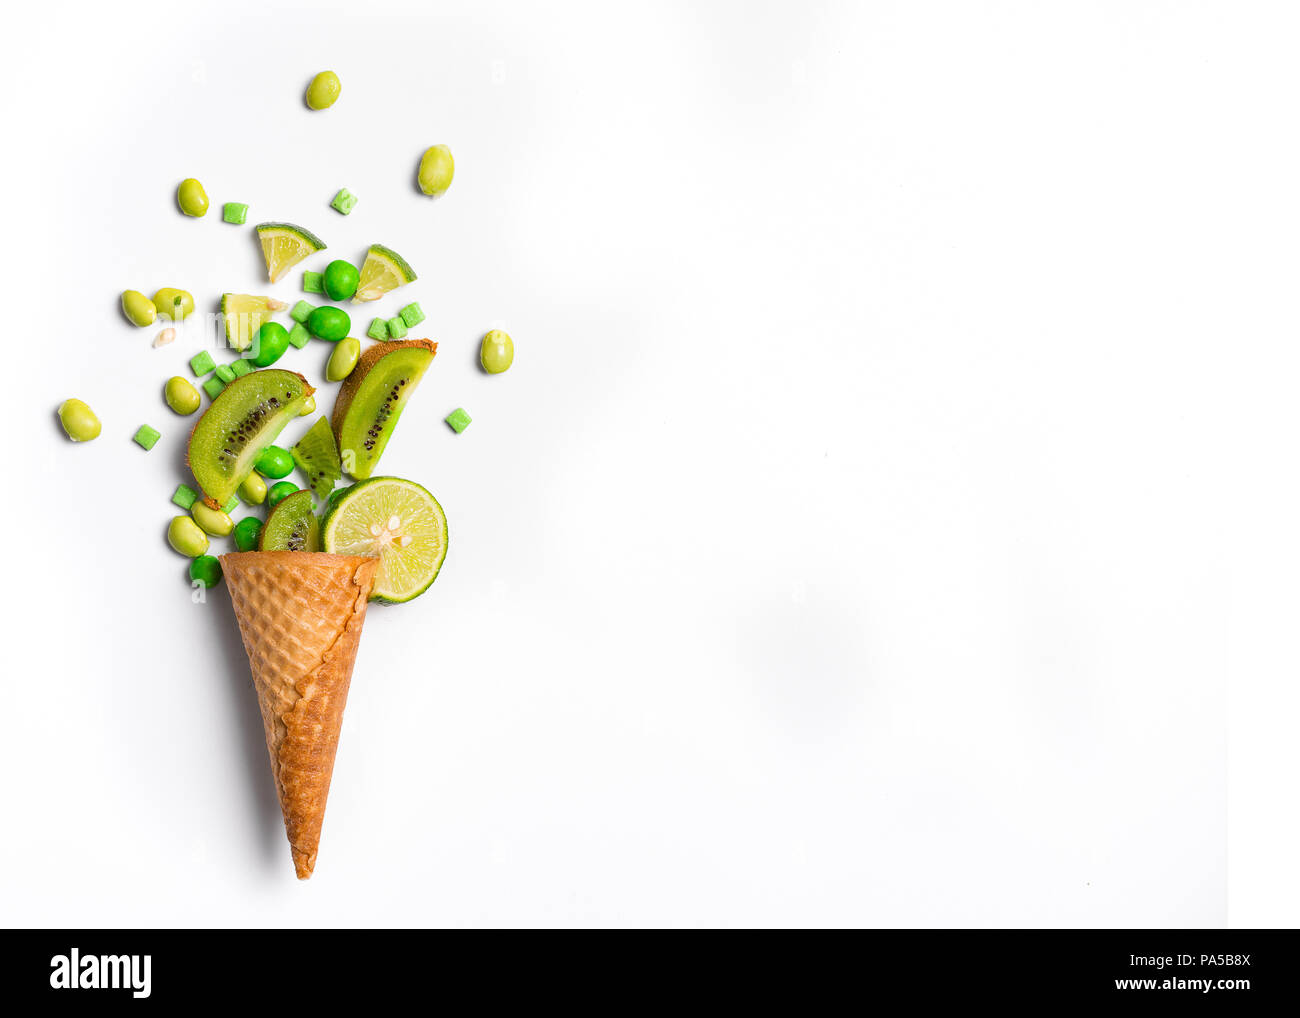 Ice cream cone flat lay image with green candy and kiwifruit packing into the cone. Stock Photo